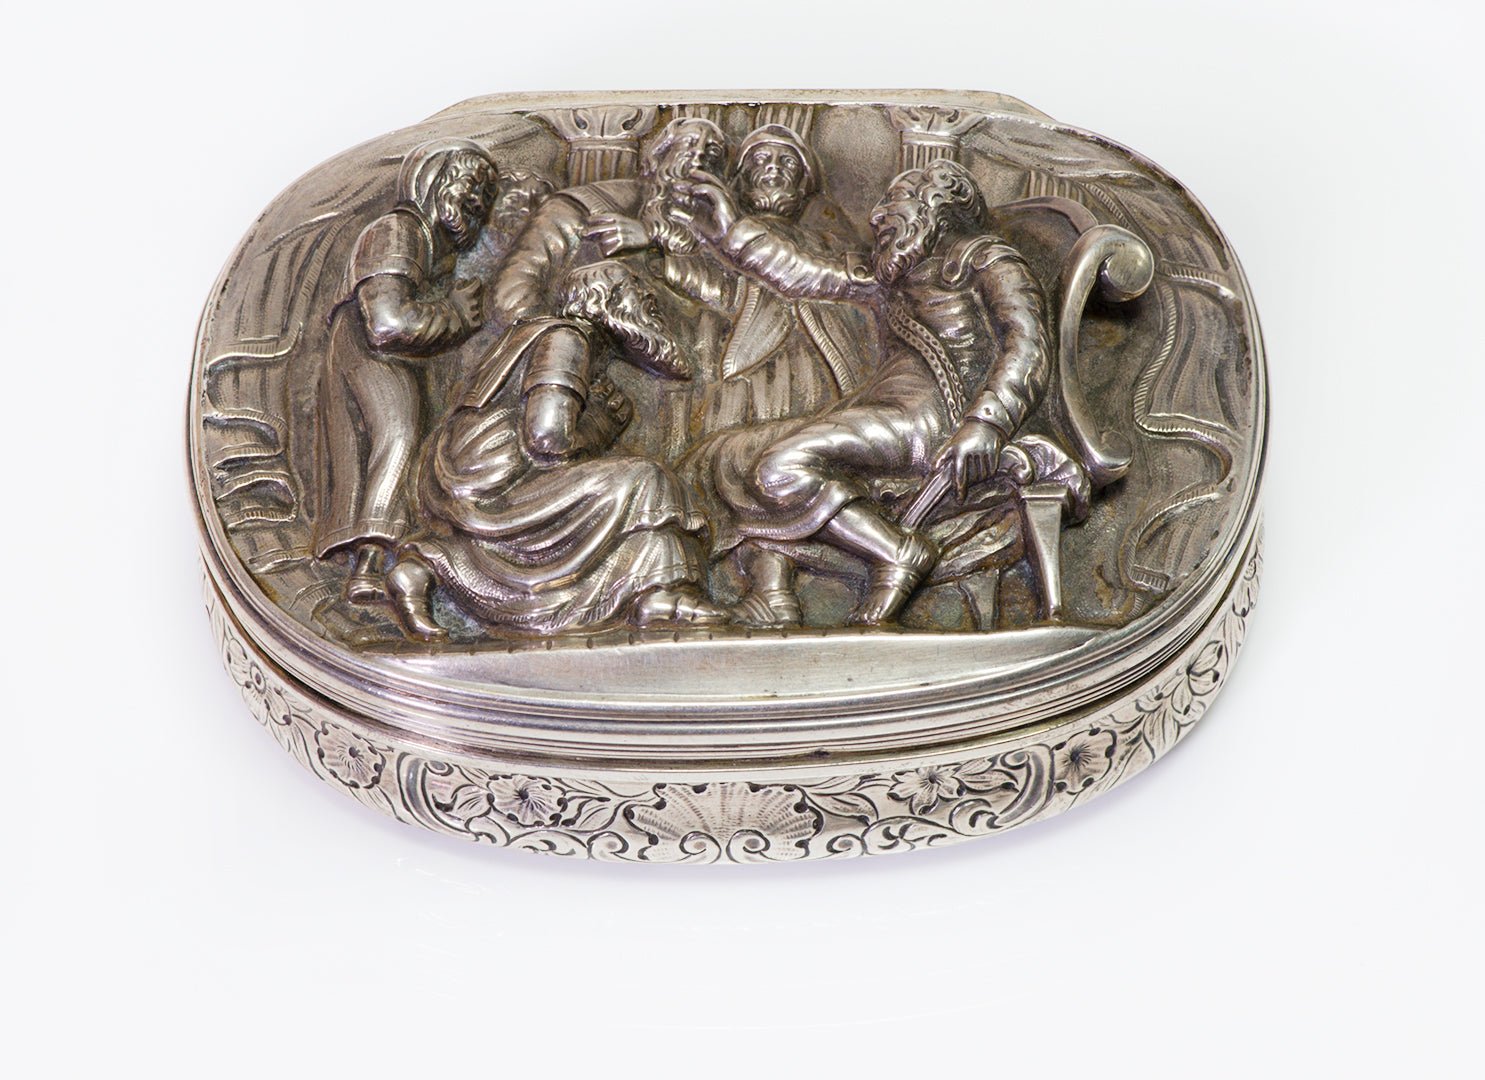 Antique Victorian High Relief Silver Snuff Box by Edward Farrell